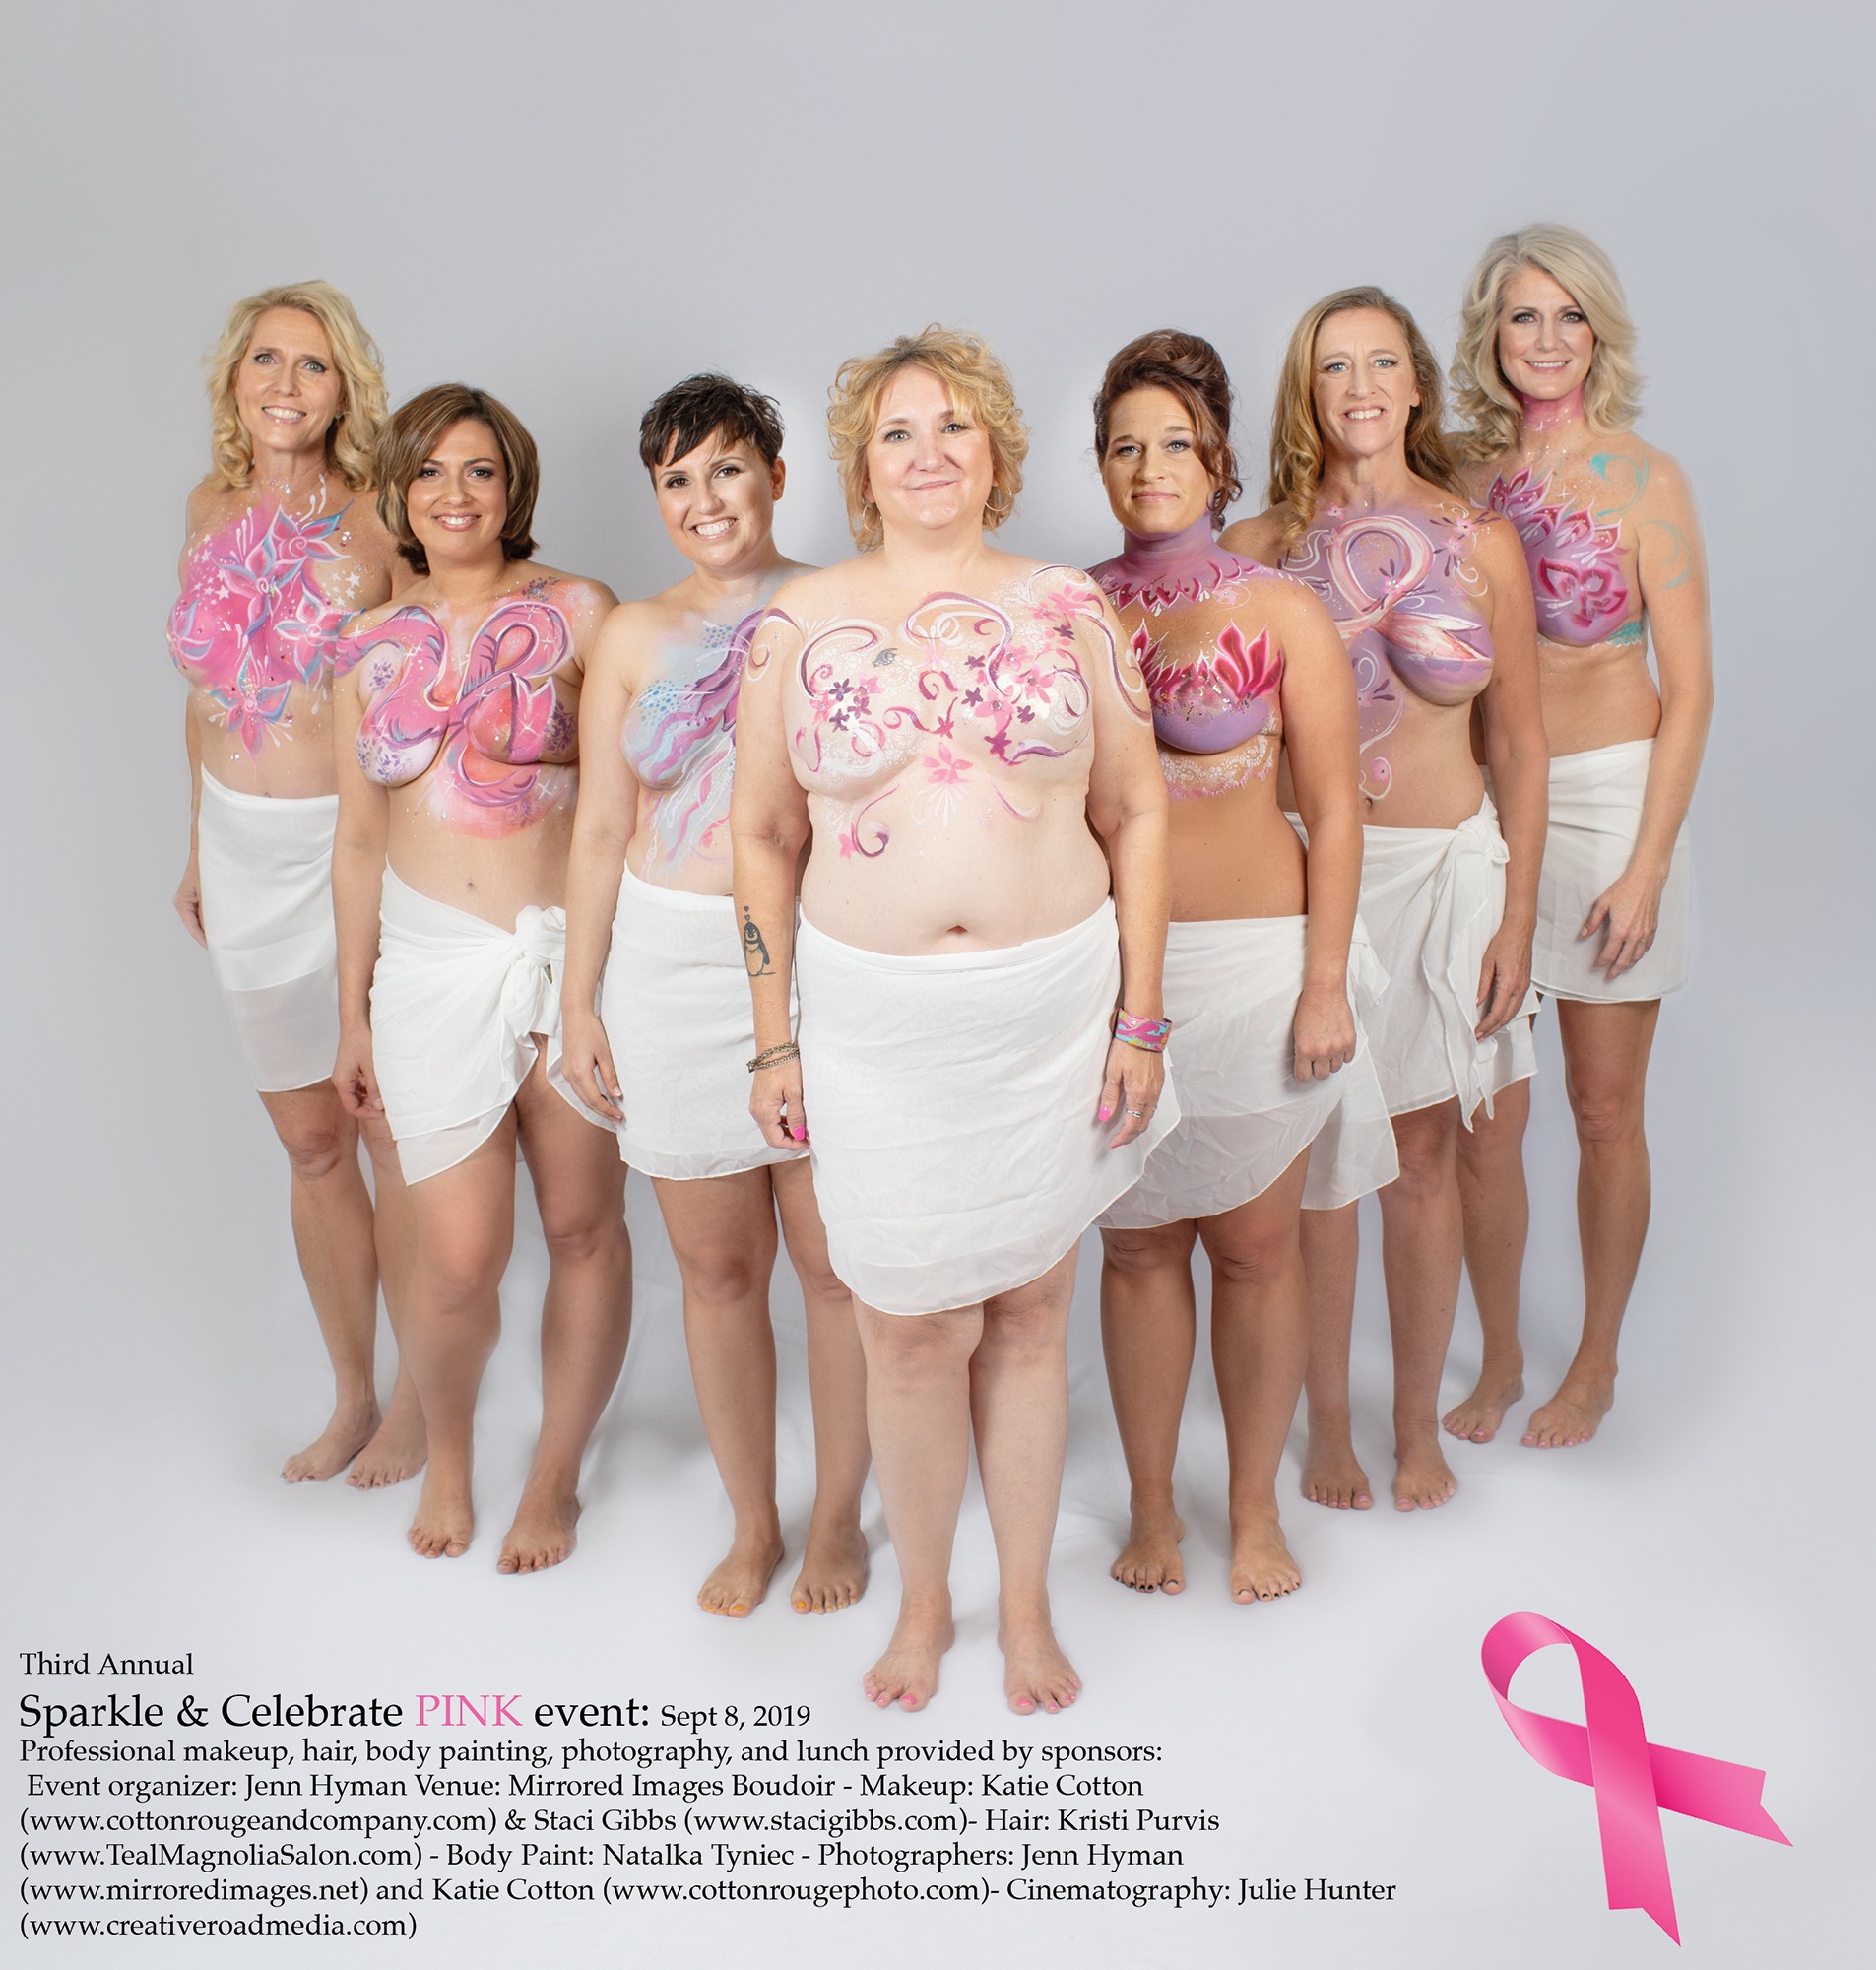 4 Breast Cancer Survivors On Embracing Their Mastectomy Scars